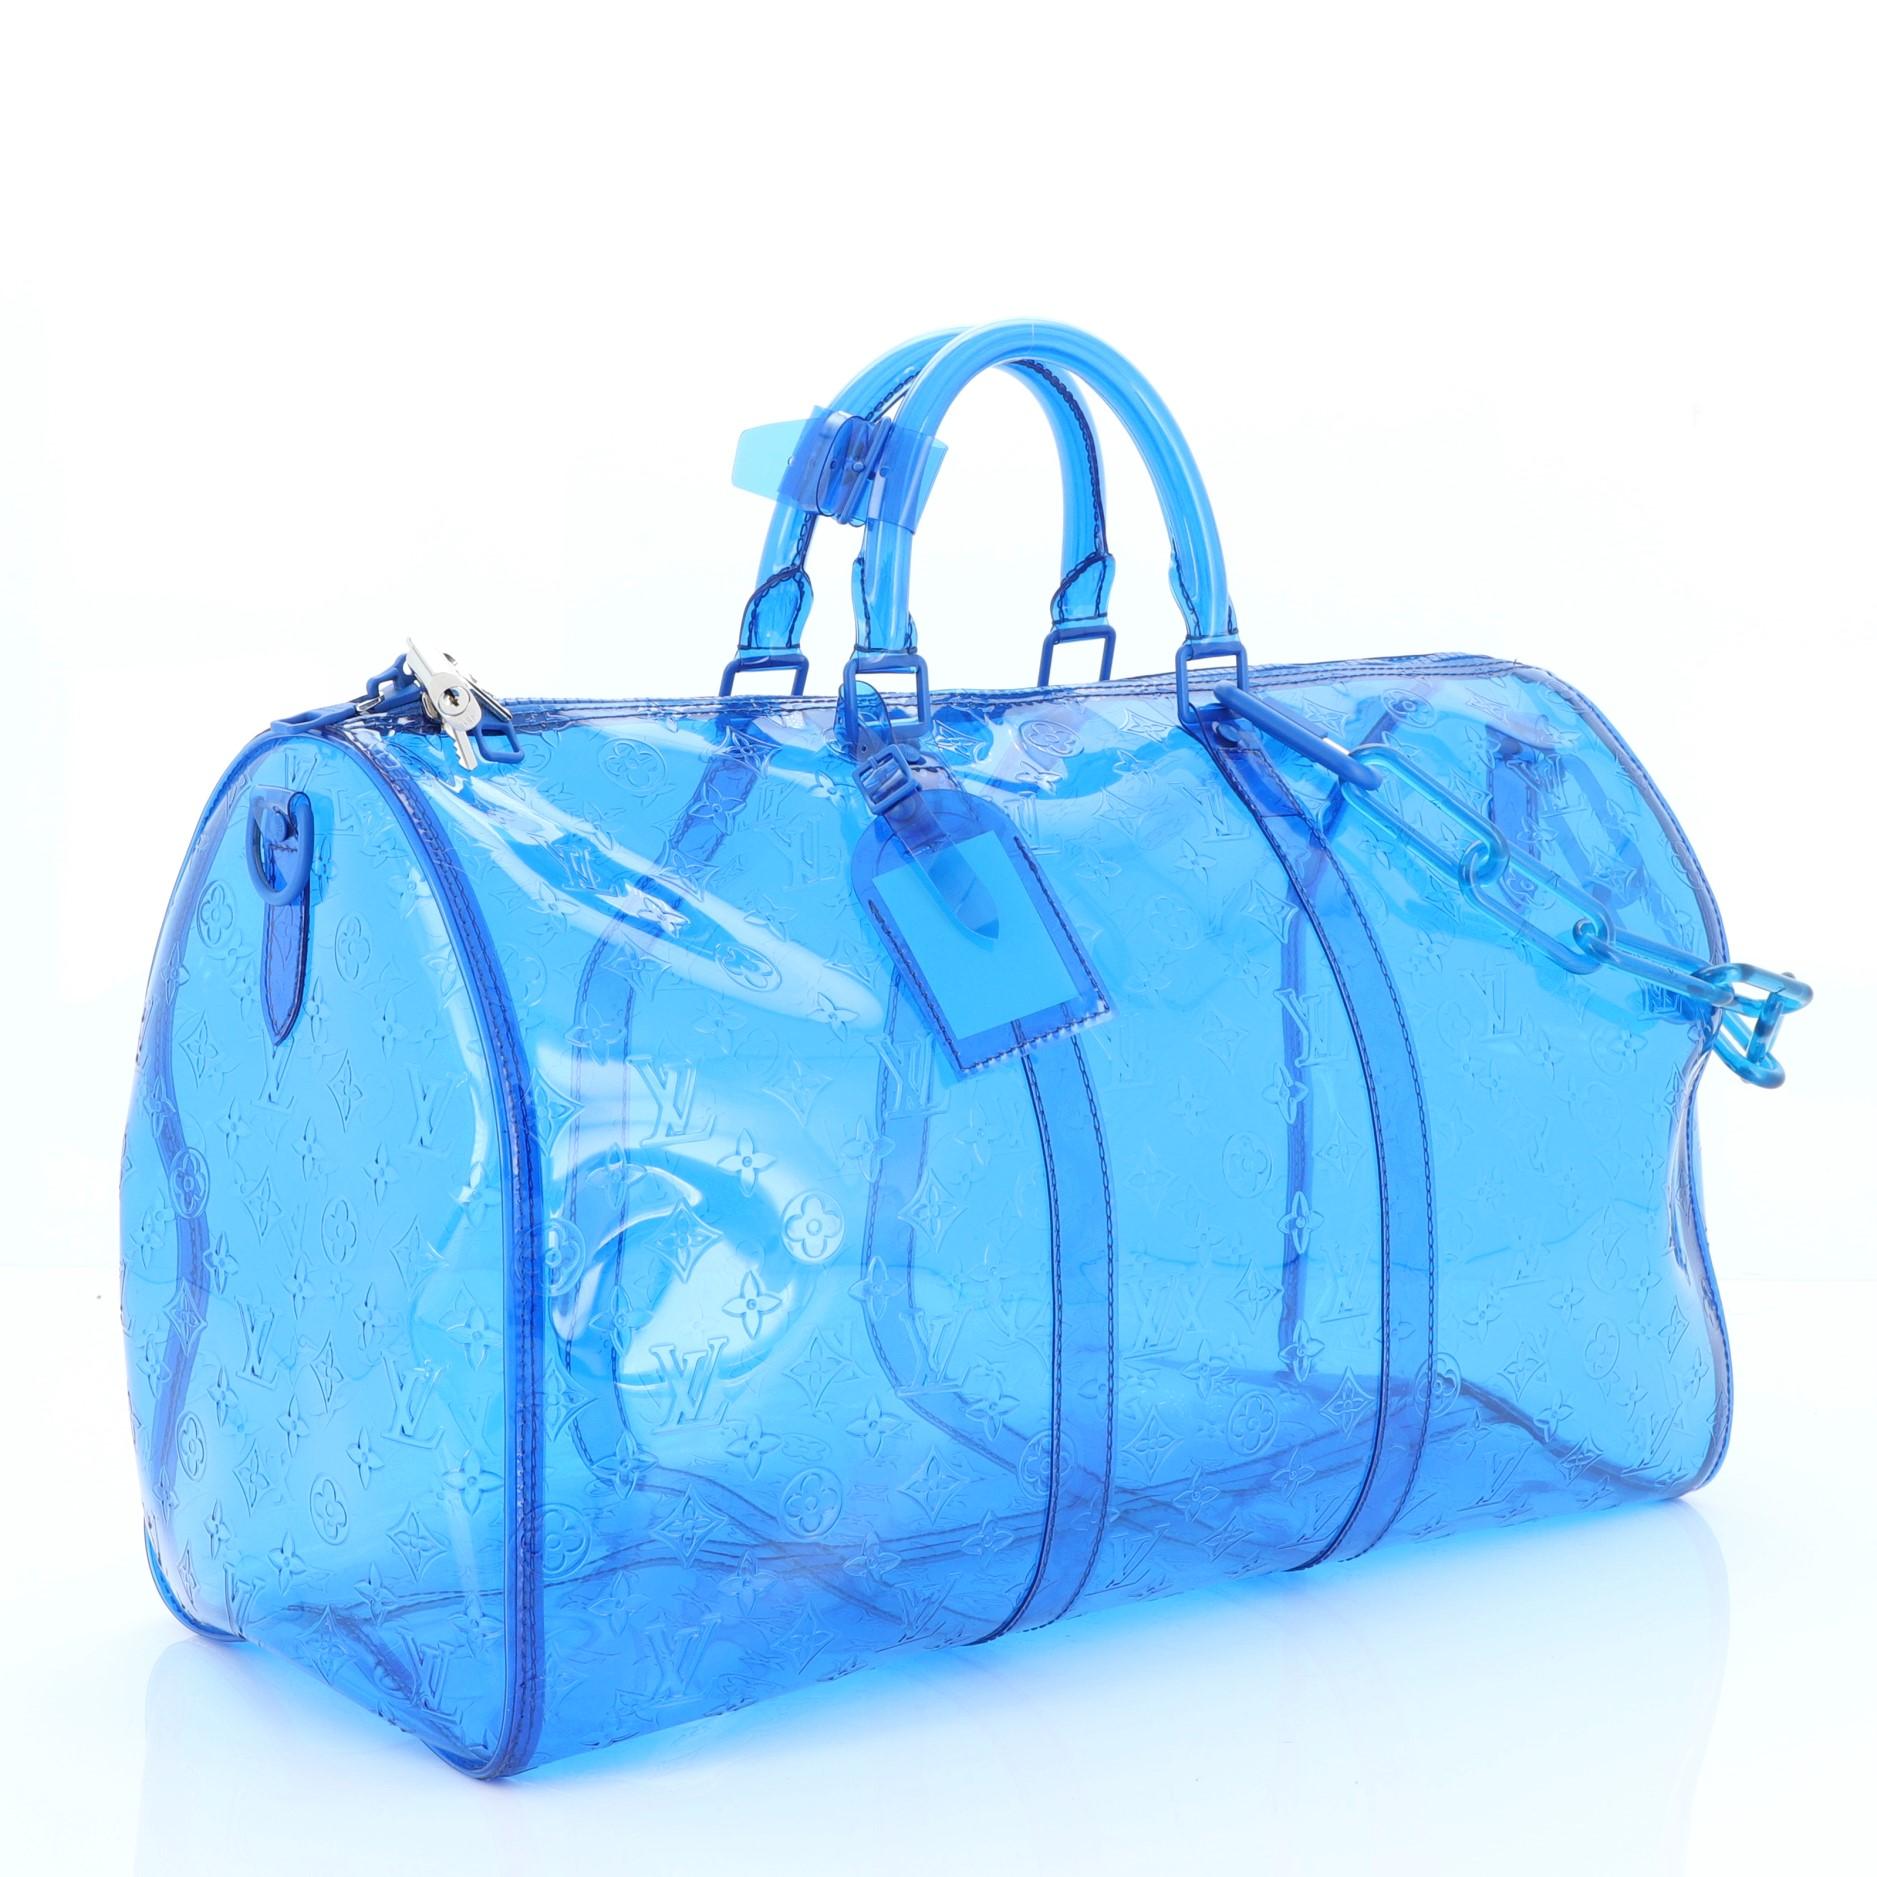 This Louis Vuitton Keepall Bandouliere Bag Limited Edition Monogram PVC 50, crafted in blue PVC, features dual rolled handles, resin chain, and silver-tone hardware. Its zip closure opens to a black PVC interior. Authenticity code reads: BA4168.